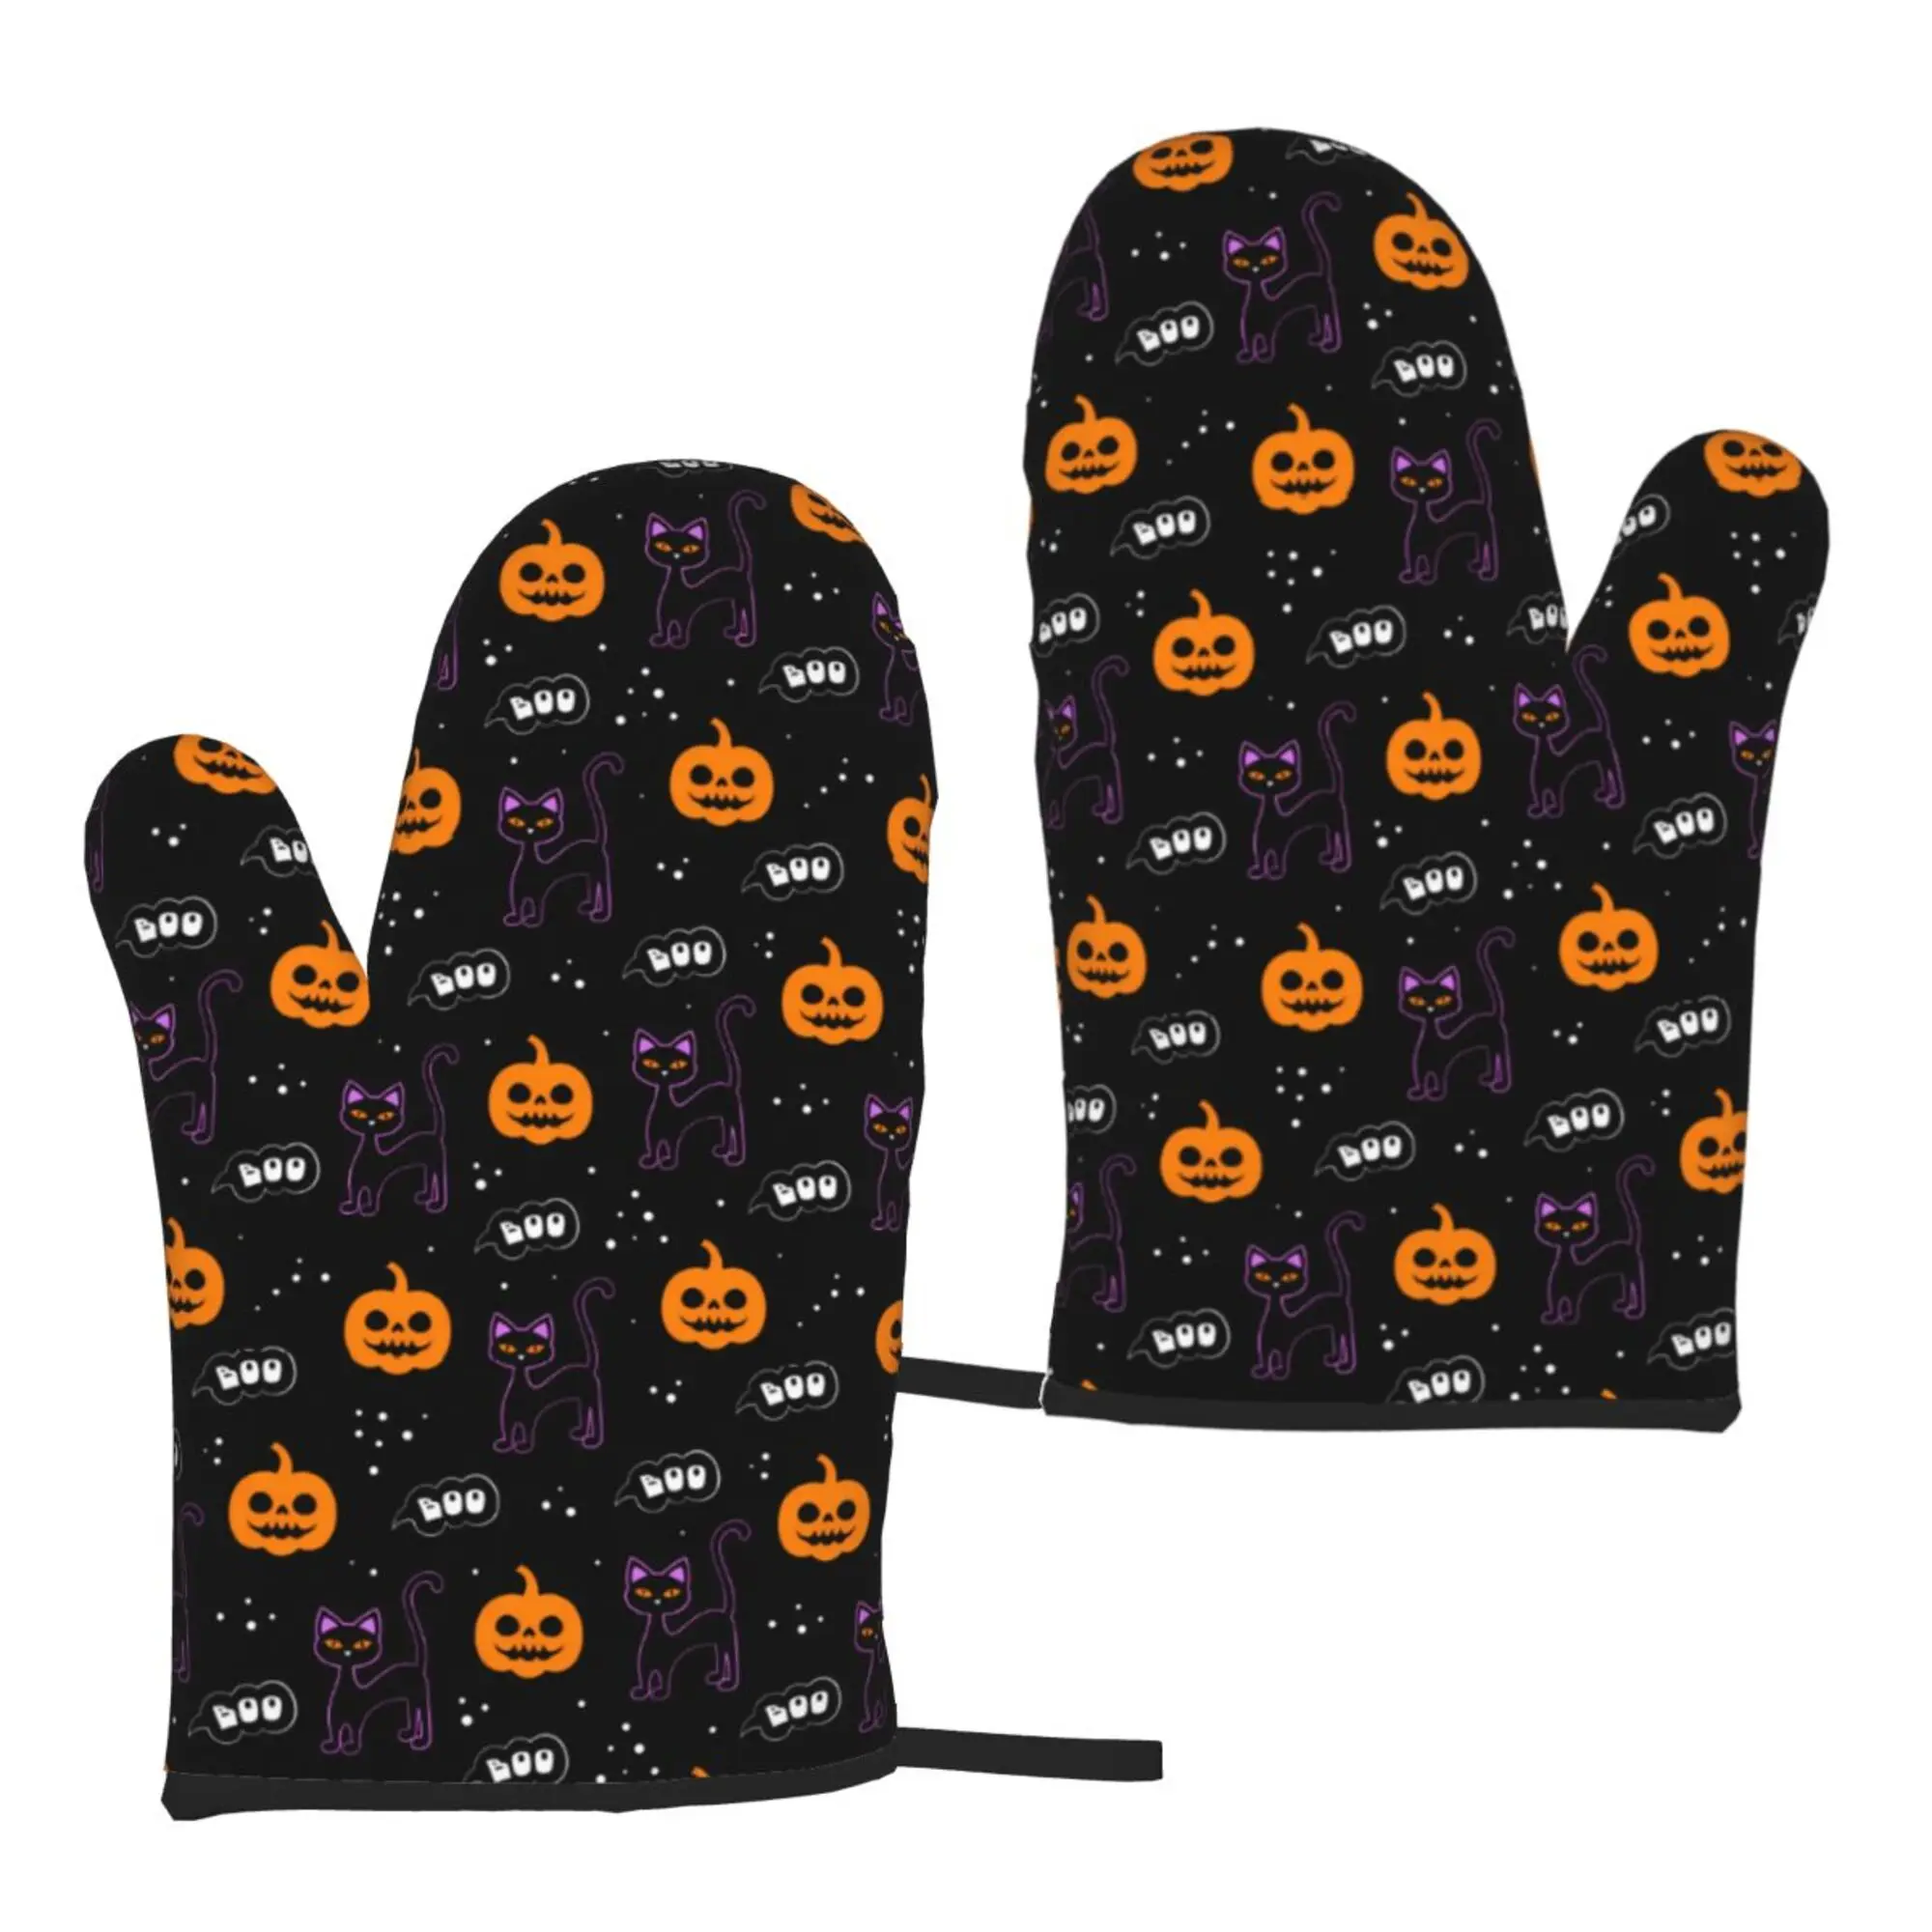 Black Cat Boo Pumpkin Halloween Oven Mitts 2pc Microwave Gloves Bbq Cooking Gloves Heat Resistant Kitchen Gloves One Size unicorn oven gloves 2pcs microwave gloves baking oven gloves cooking heat resistant oven mitts for kitchen bbq all seasons